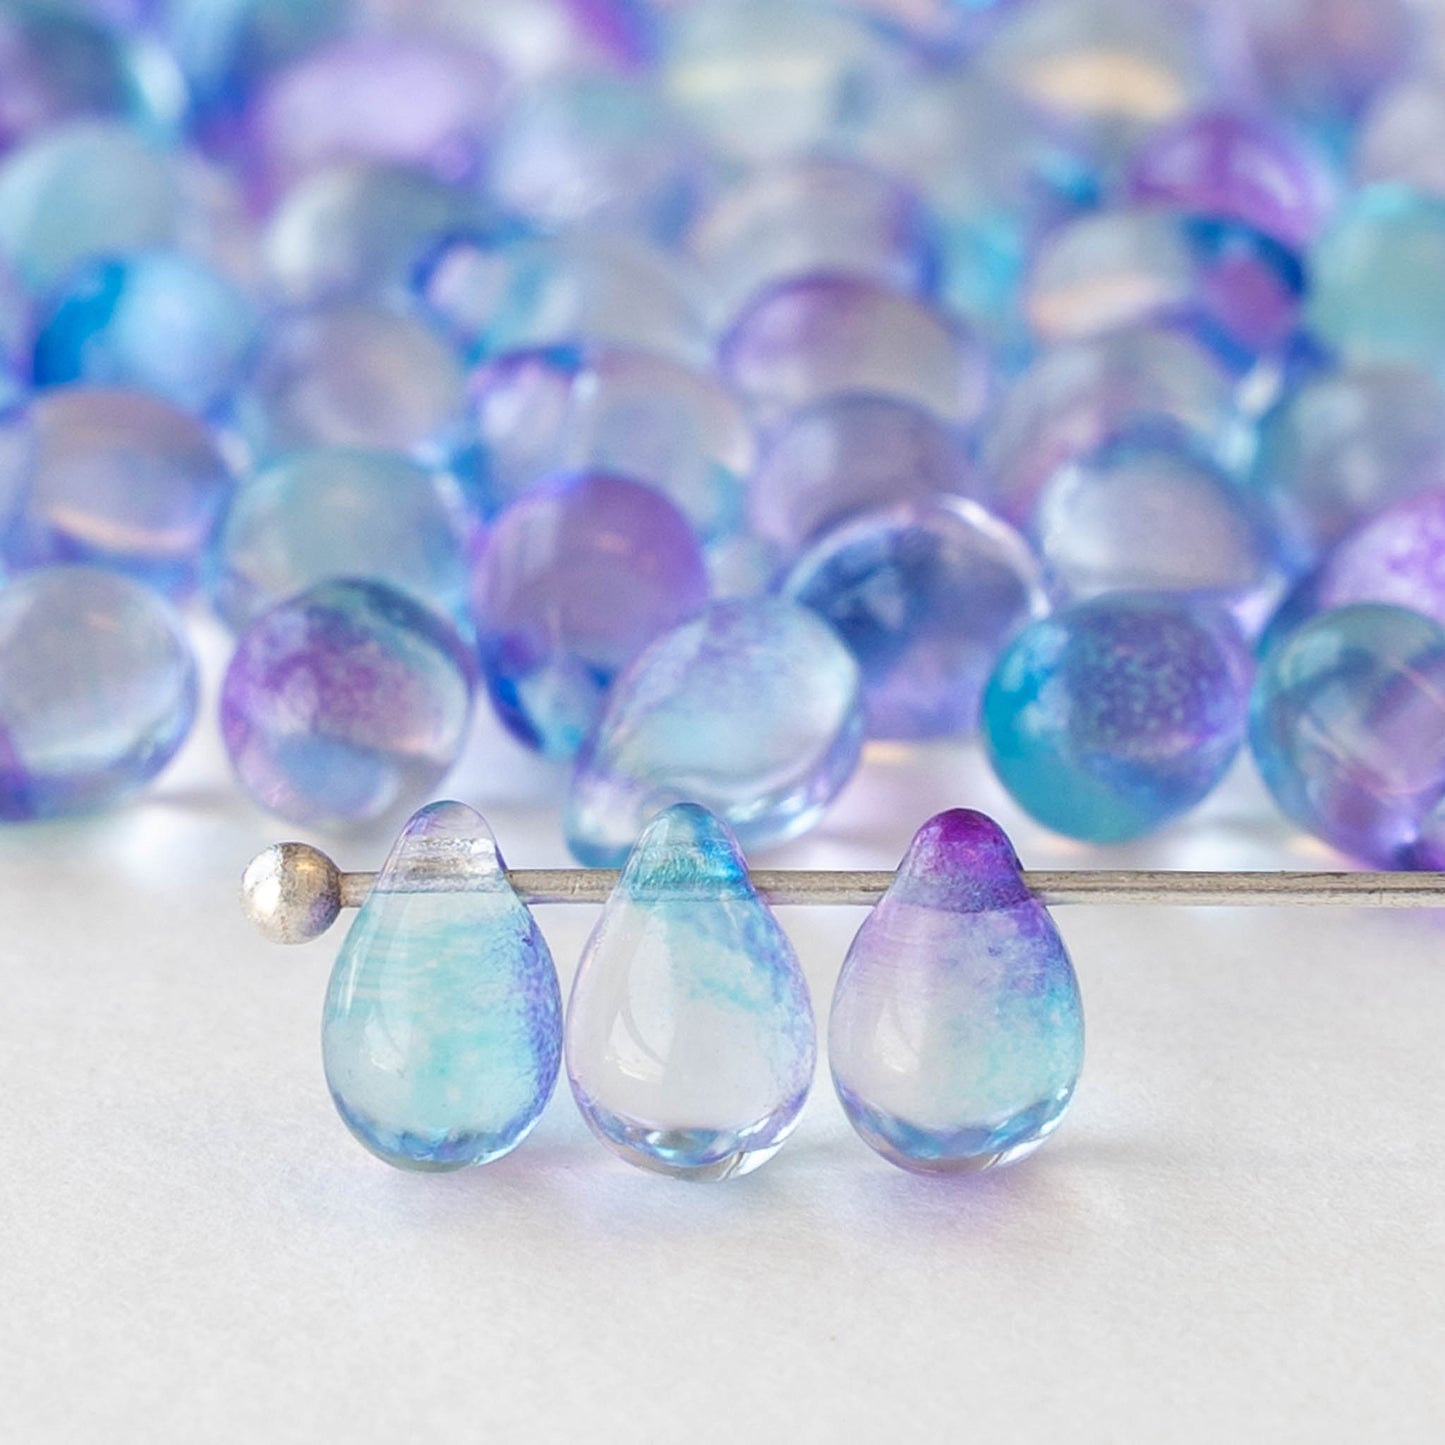 Load image into Gallery viewer, 5x7mm Glass Teardrop Beads - Lavender Blue Mix - 75 beads
